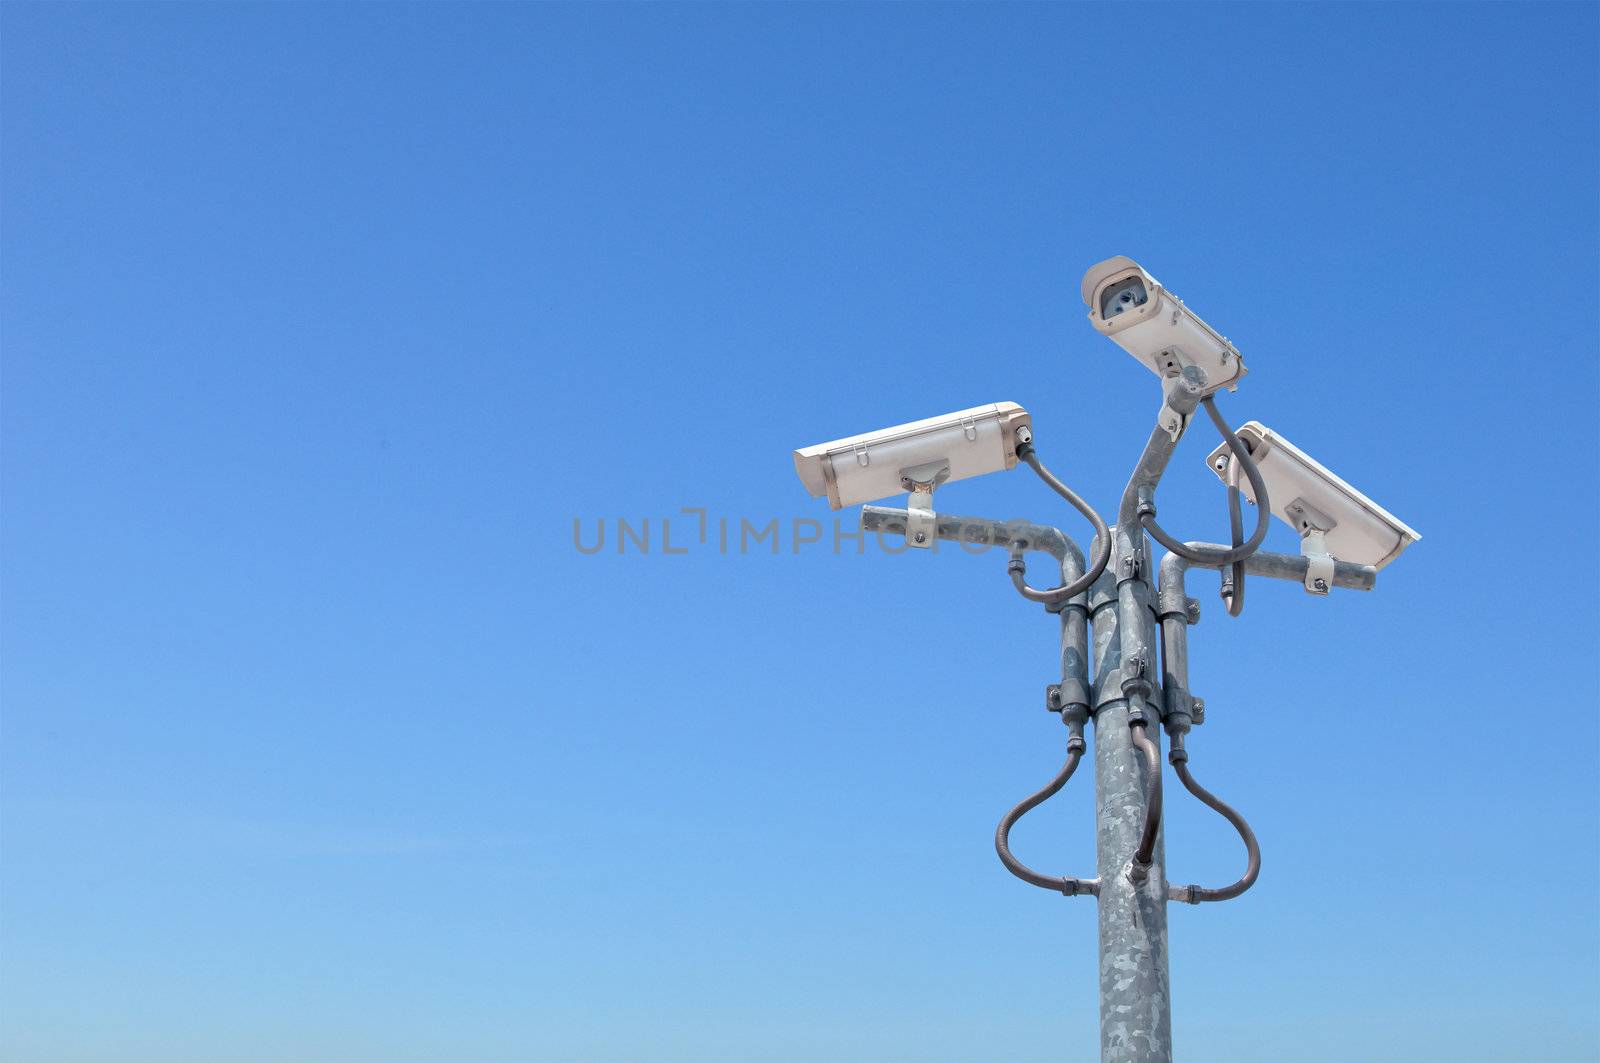 Three outdoor security cameras with housing on the pole cover multiple angles.clipping path included